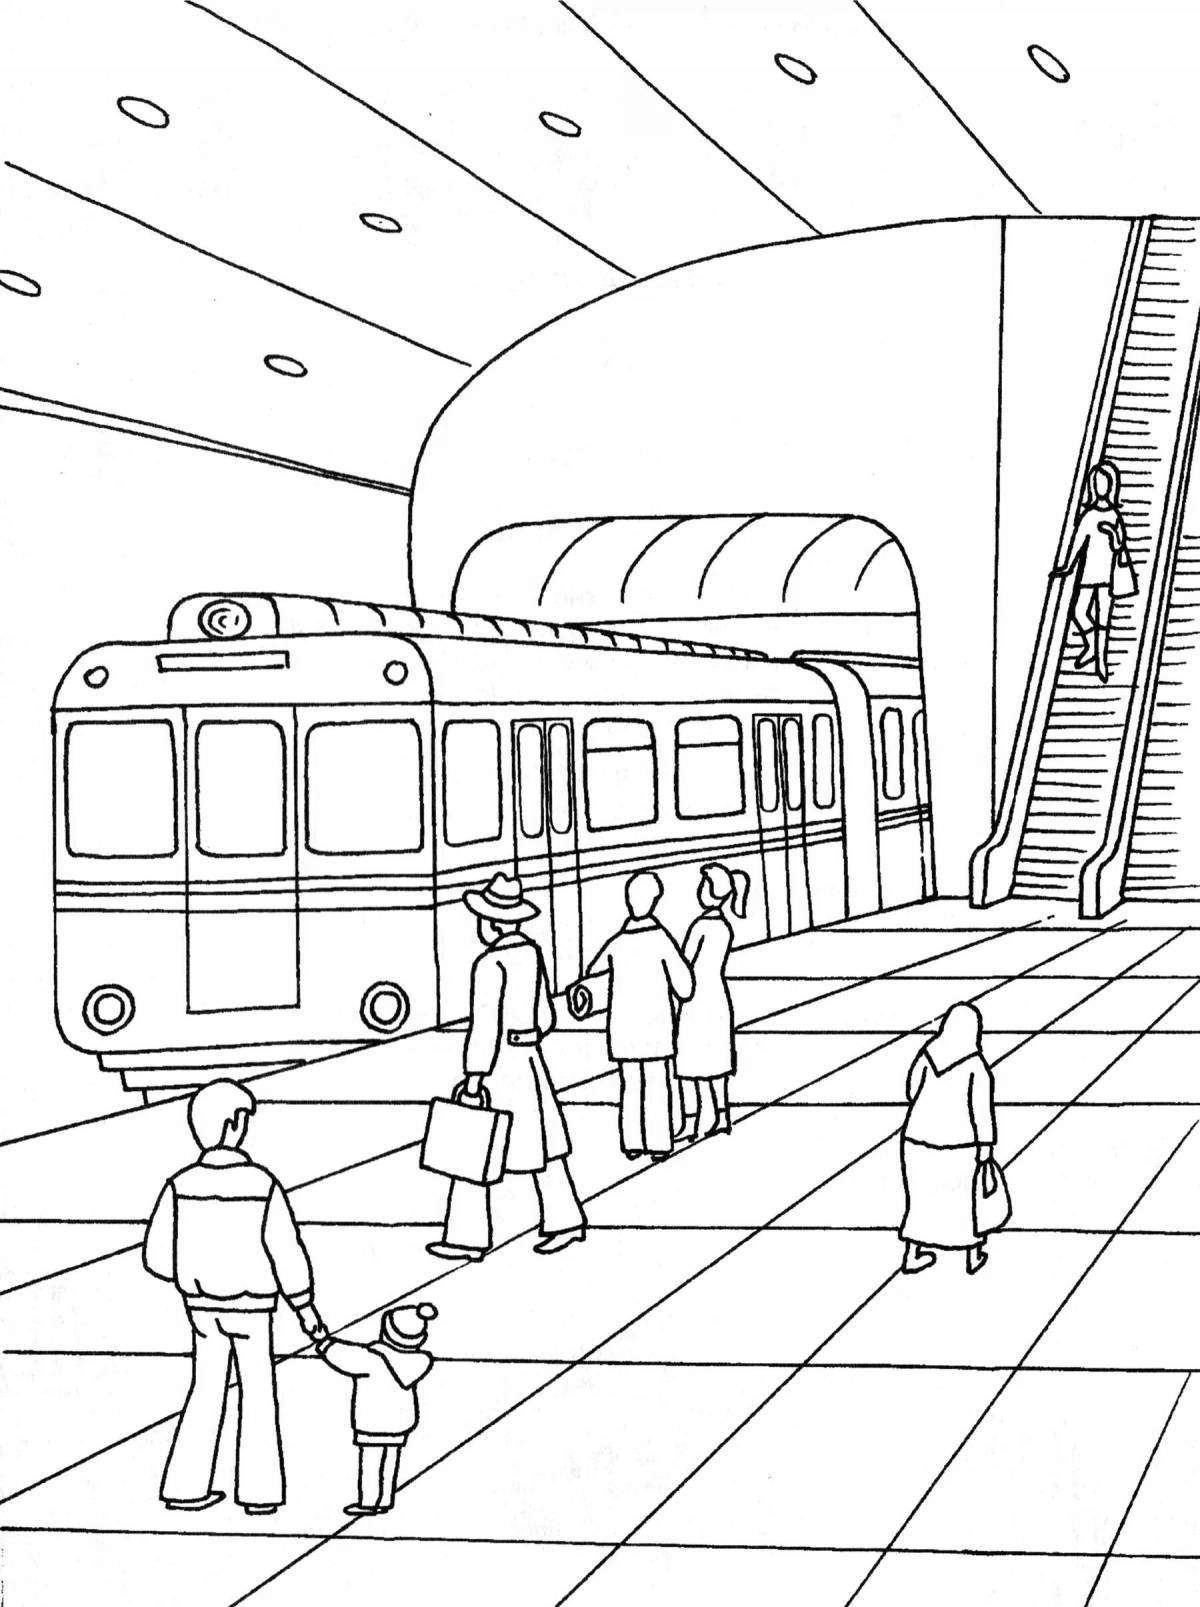 Coloring book flawless Moscow metro train